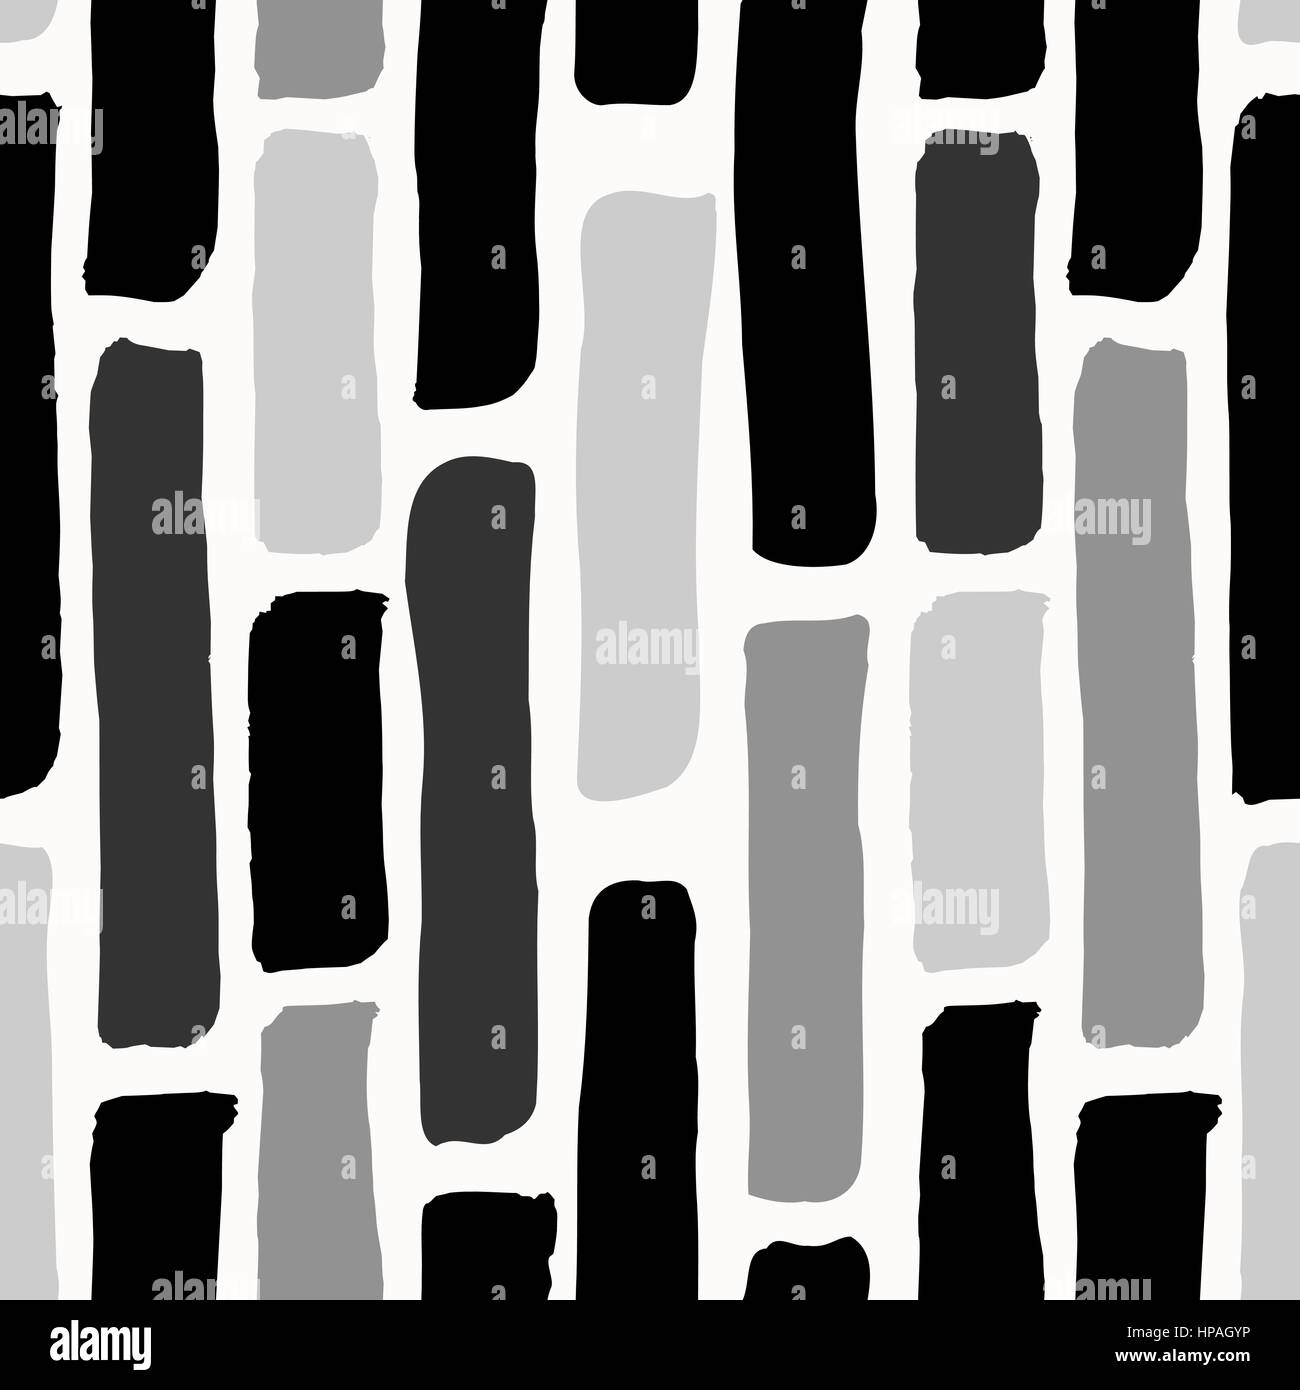 Hand drawn seamless repeating pattern with square shapes in black